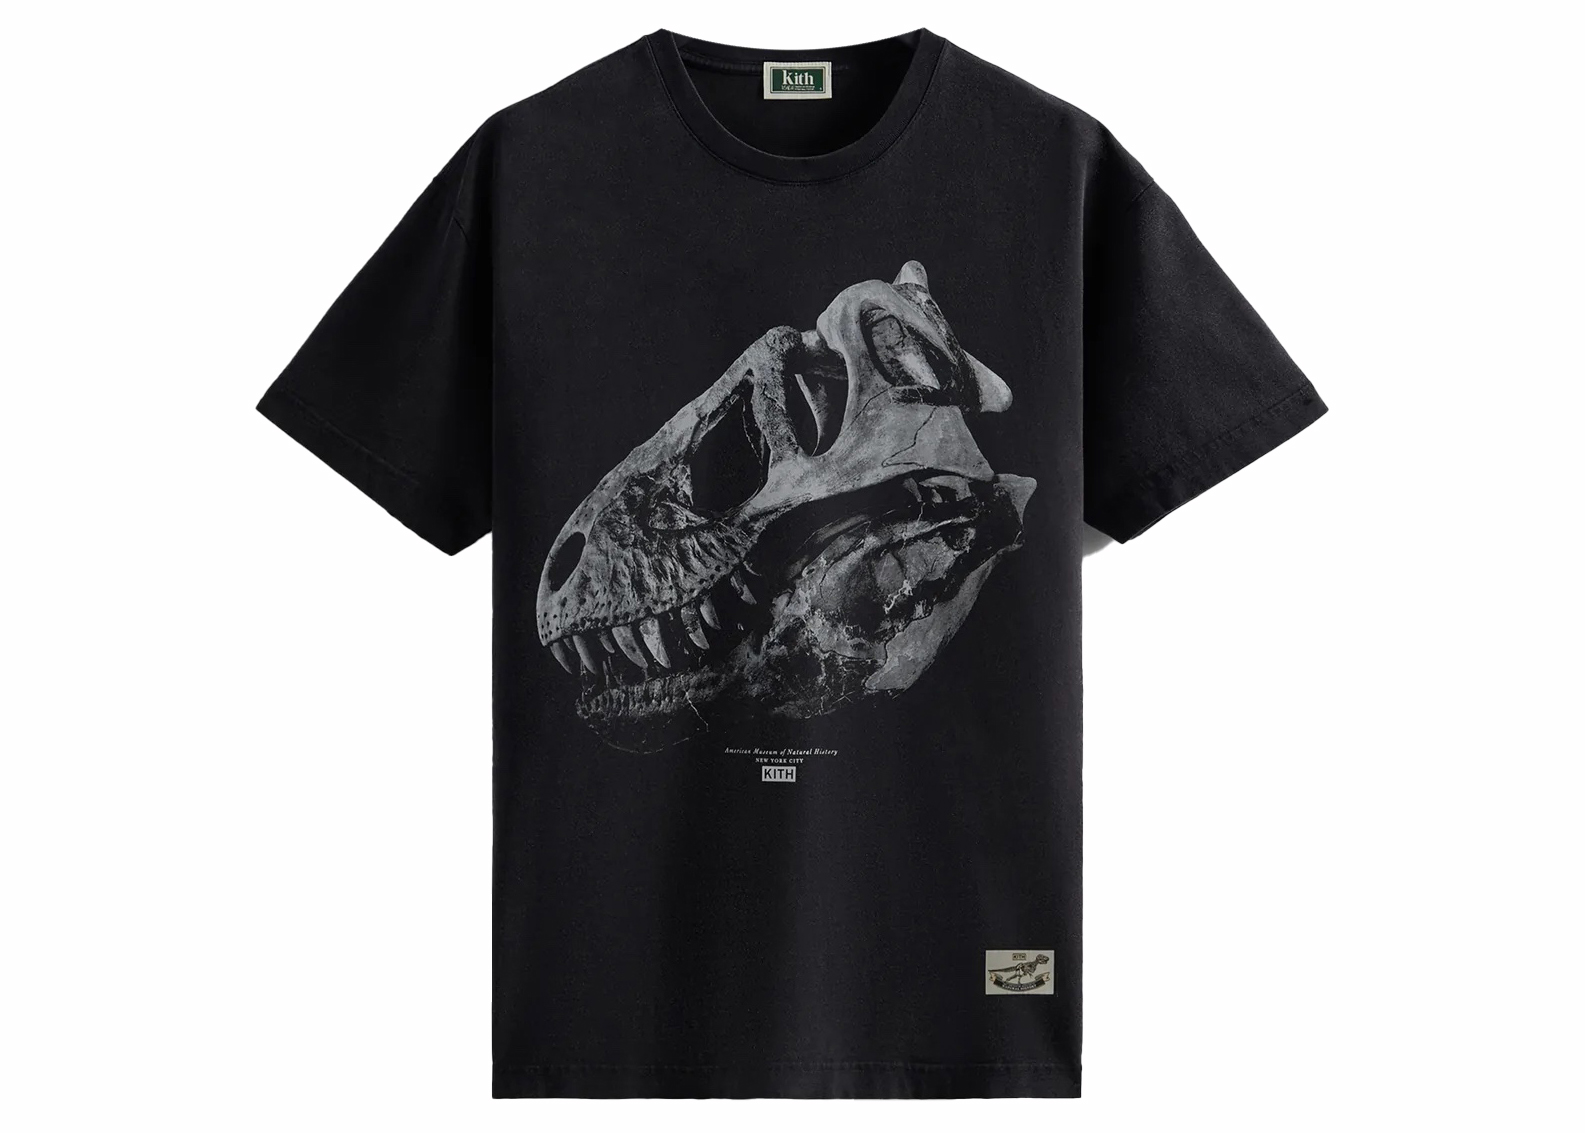 KITH FOR AMNH LATE MAMMALS VINTAGE Lメンズ